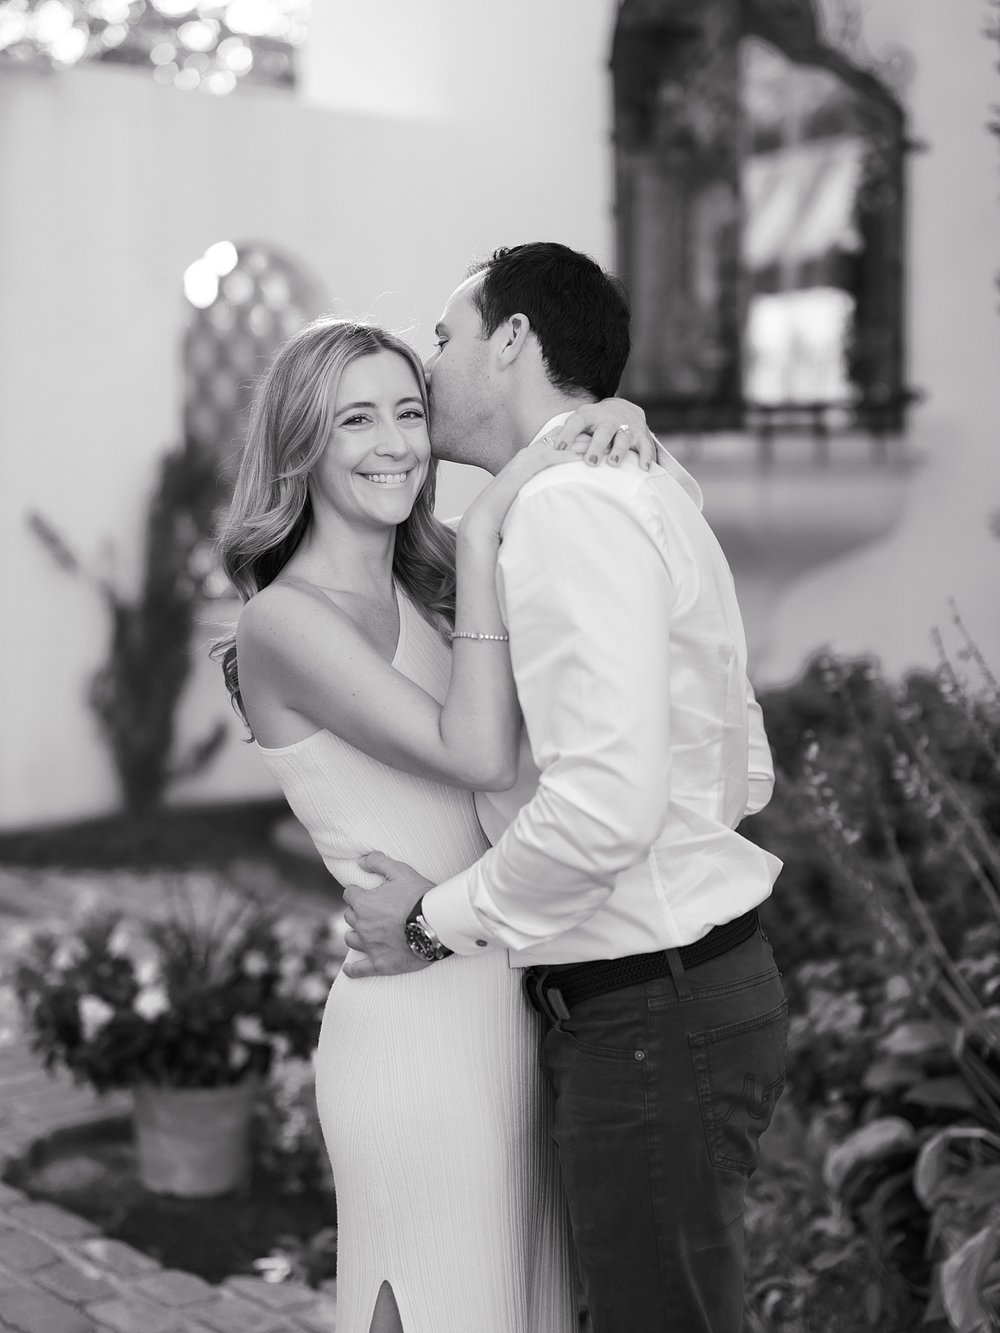 man leans to kiss woman's cheek during engagement session at the Vanderbilt Museum